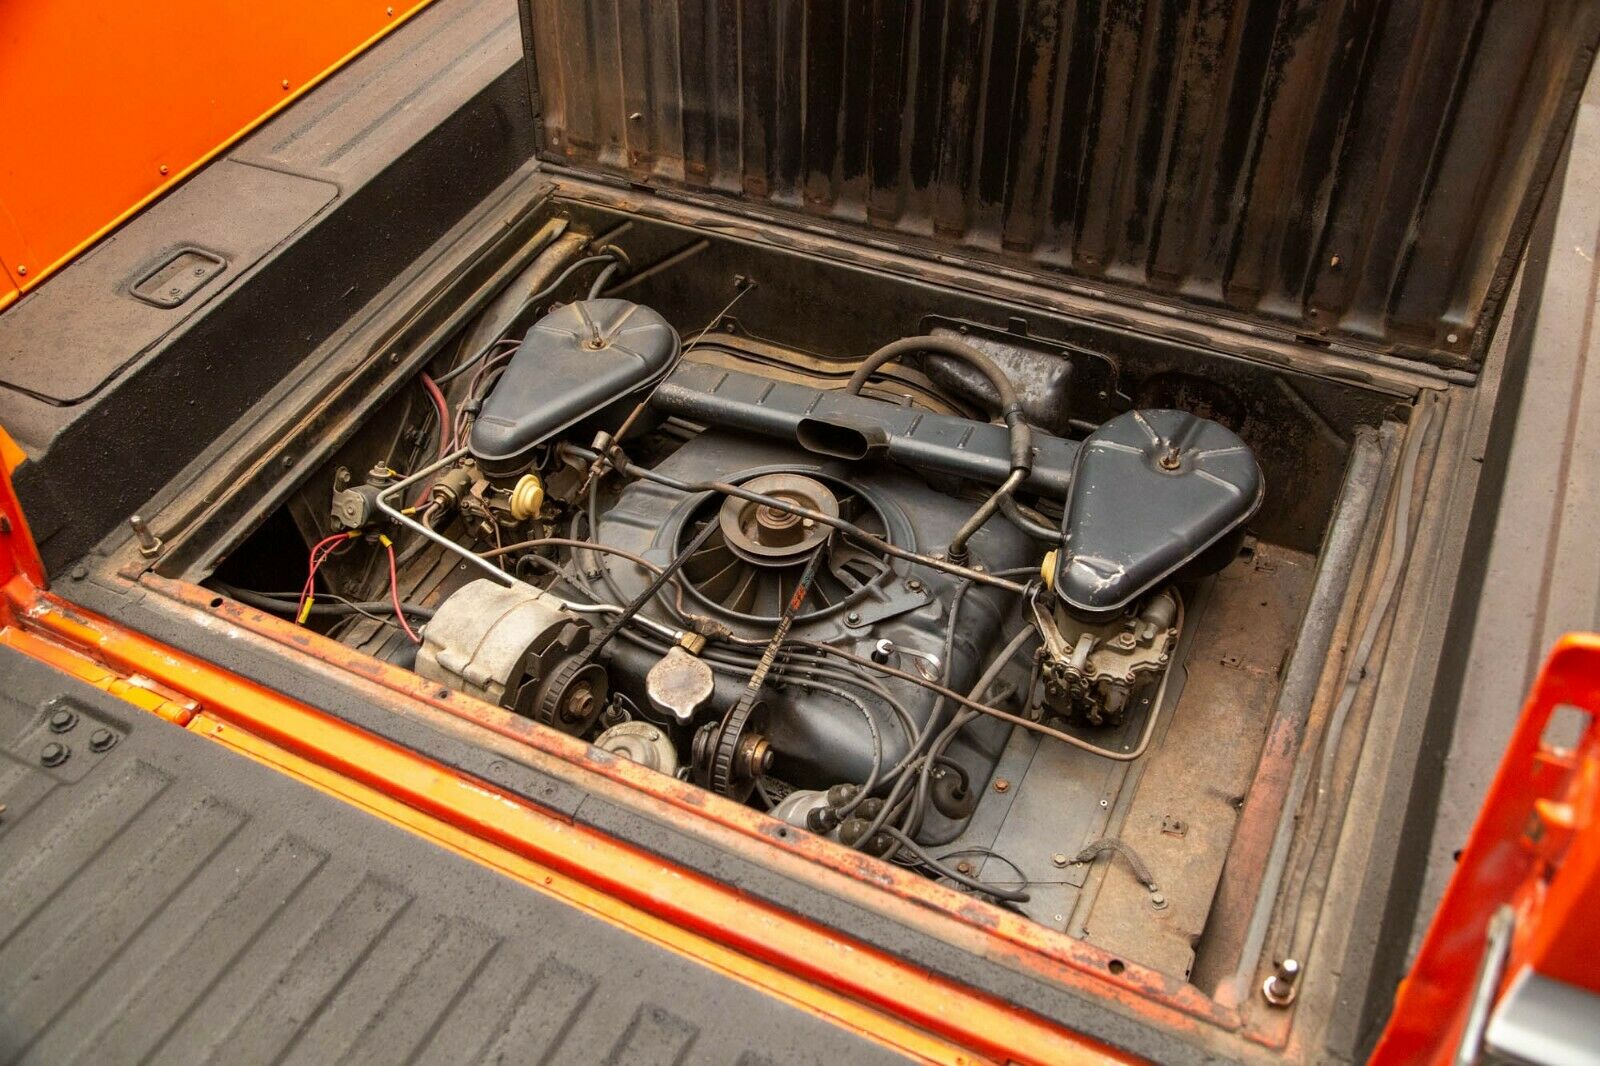 The base engine in the Rampside was 140 cubic inches, but a 164-cubic-inch version debuted for 1964—and is in this truck.